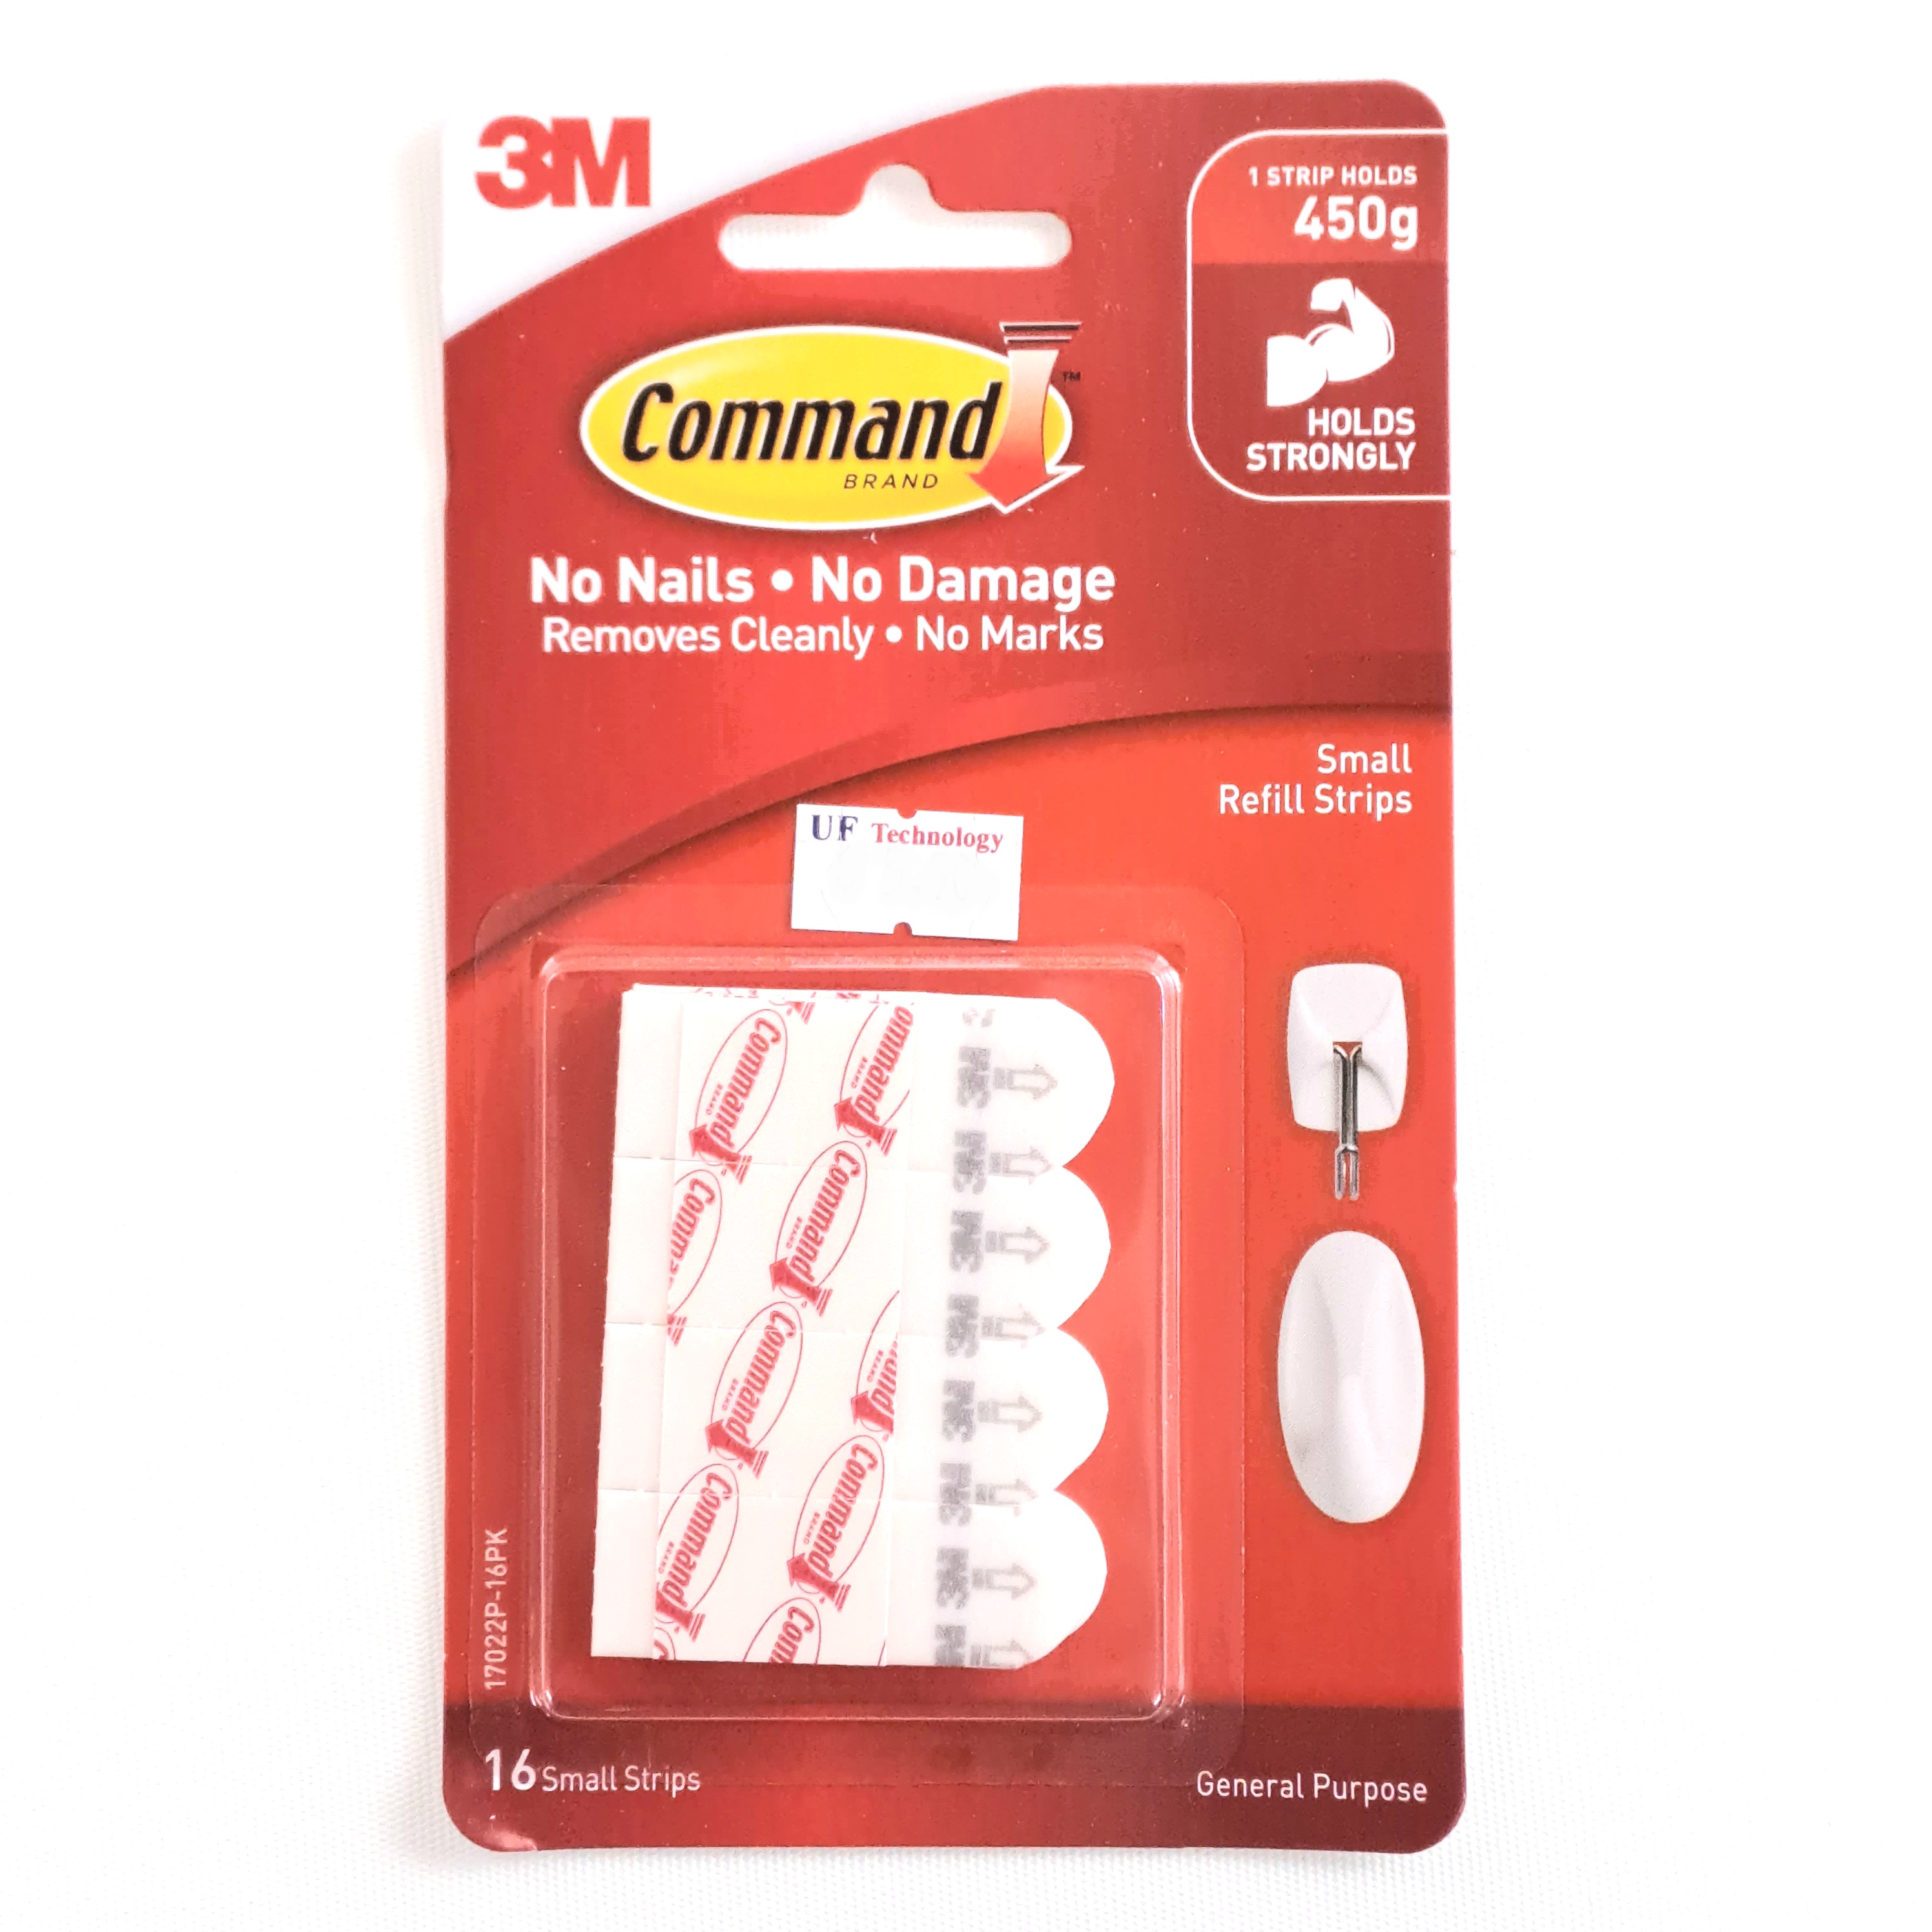 3M Command Small Refill Strips 16 Strips